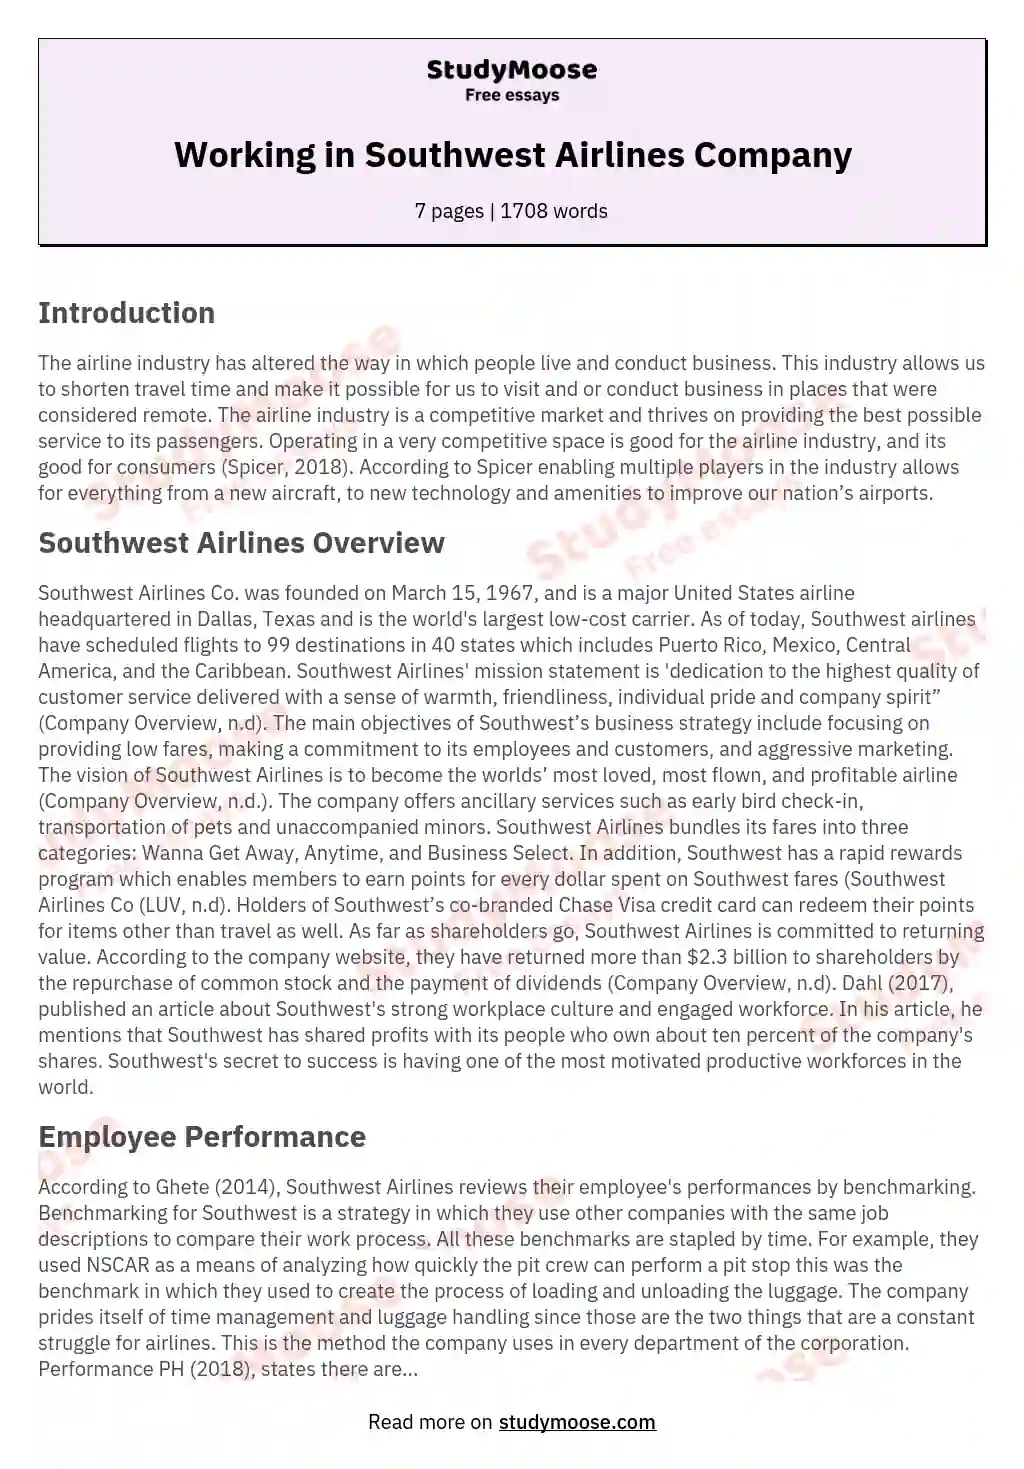 Working in Southwest Airlines Company essay